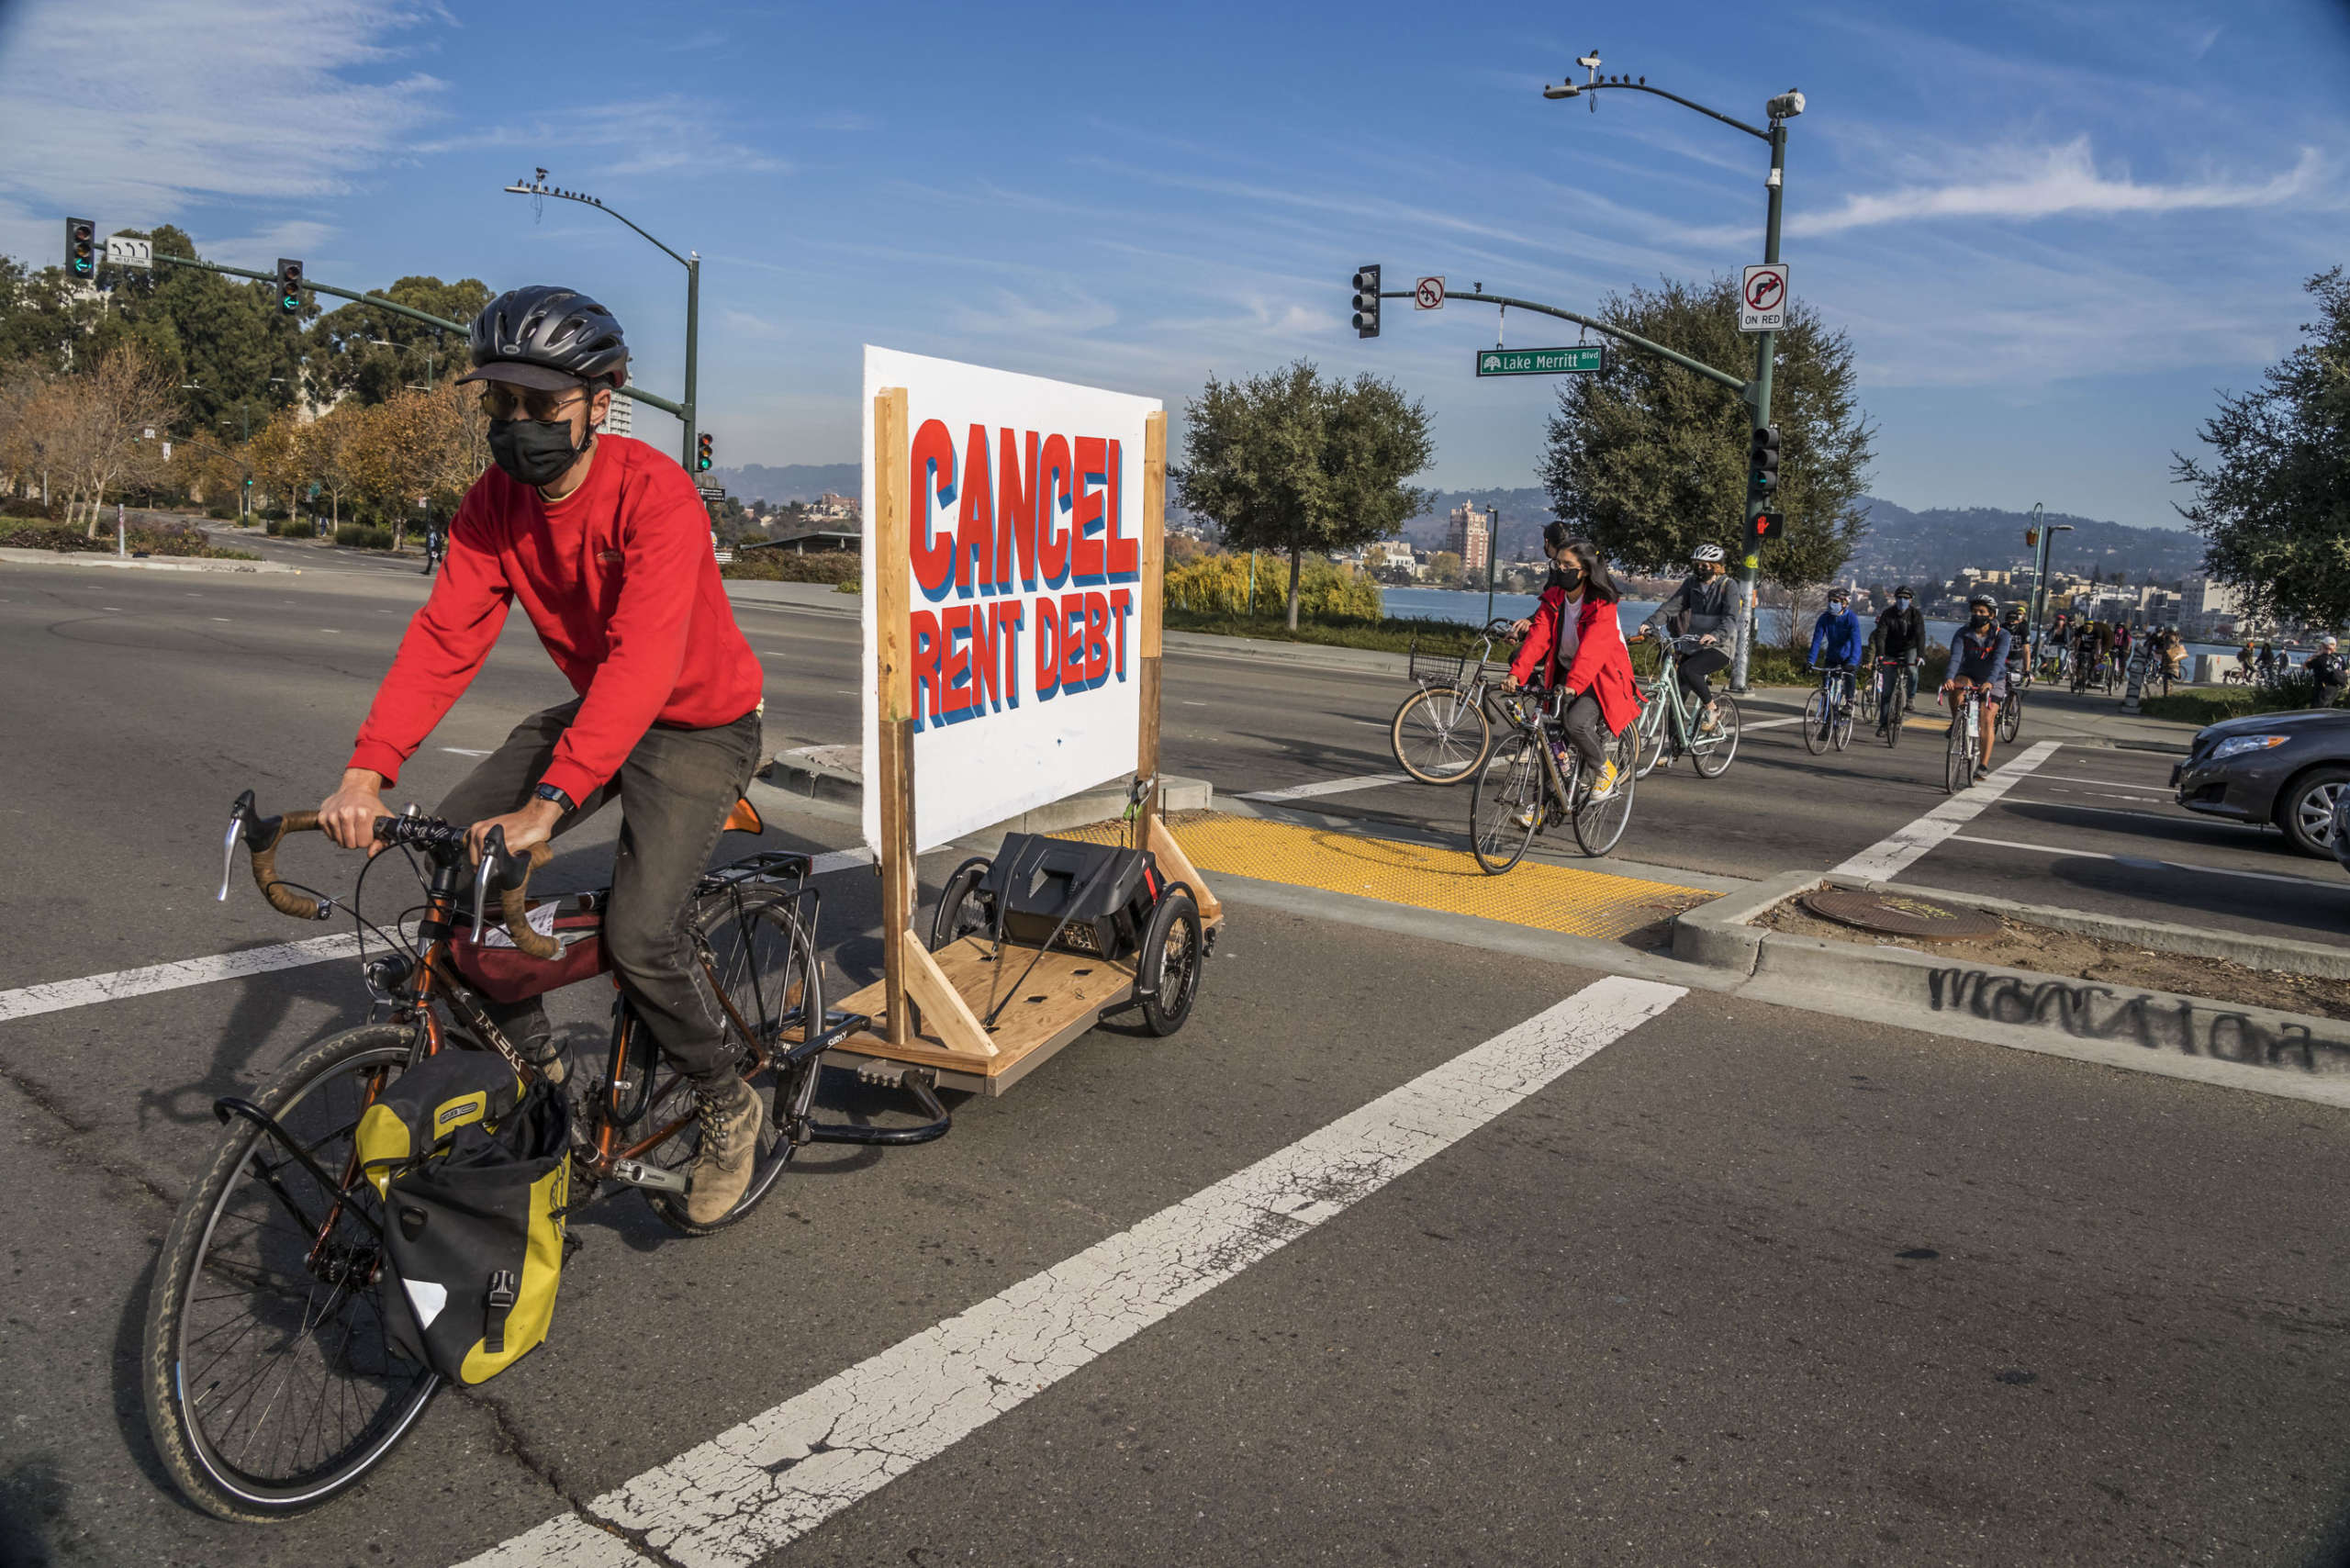 A caravan of bicycles and cars leaves Lake Merritt, as the lead bicycle pulls a banner with the action's demand: Cancel the Rent.